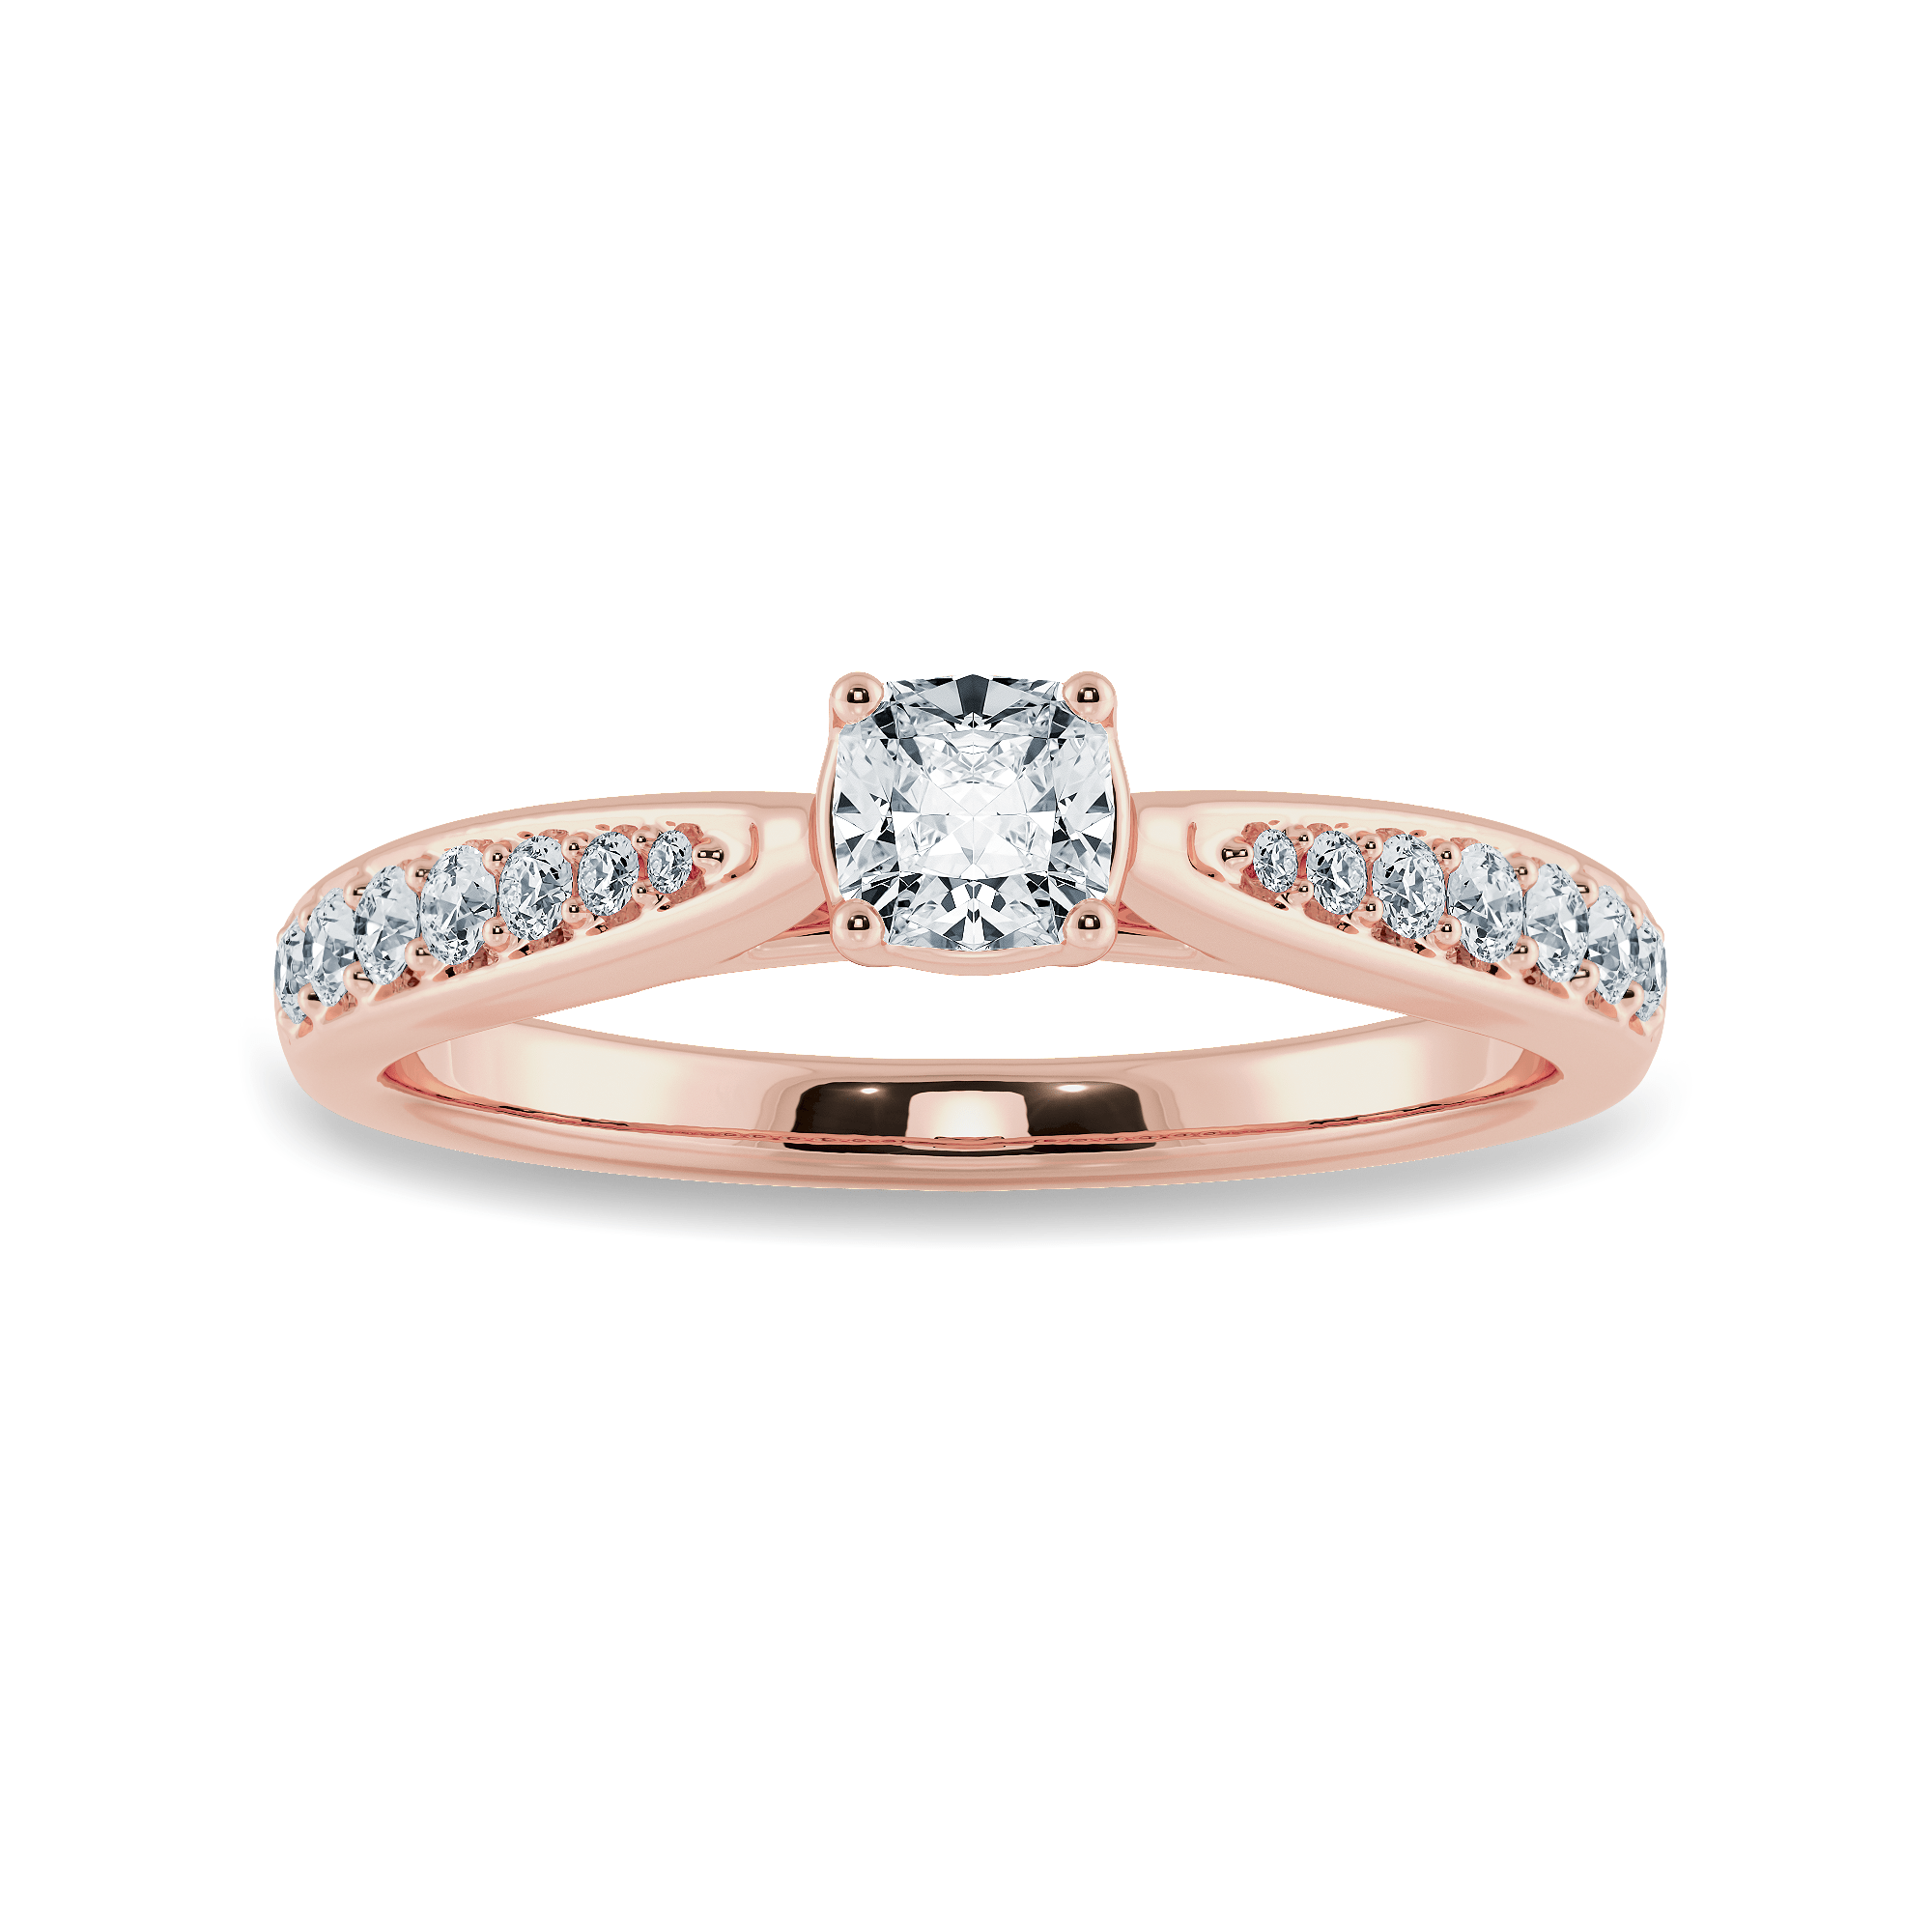 Promised Love Diamond Bridal Set (1/4 ct. t.w.) in 14k Rose Gold Over  Sterling Silver - Macy's